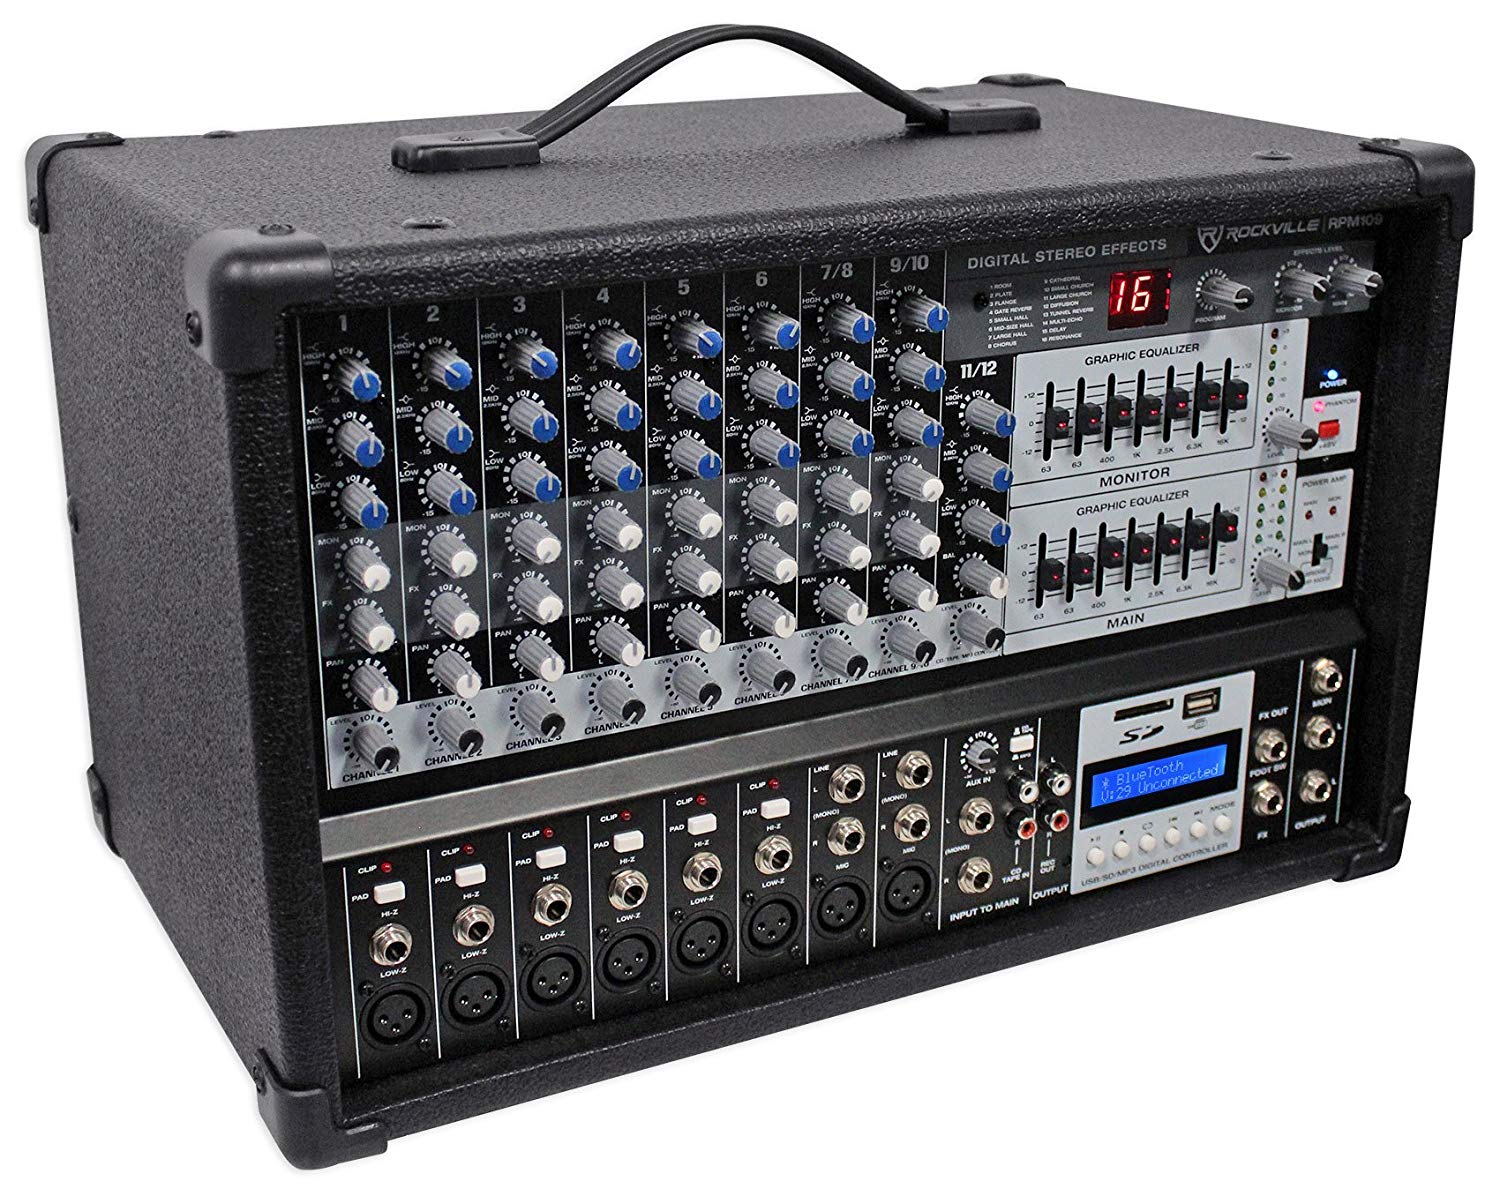 Rockville RPM109 10 Channel 4800w Powered Mixer, 7 Band EQ, Effects, USB, 48V